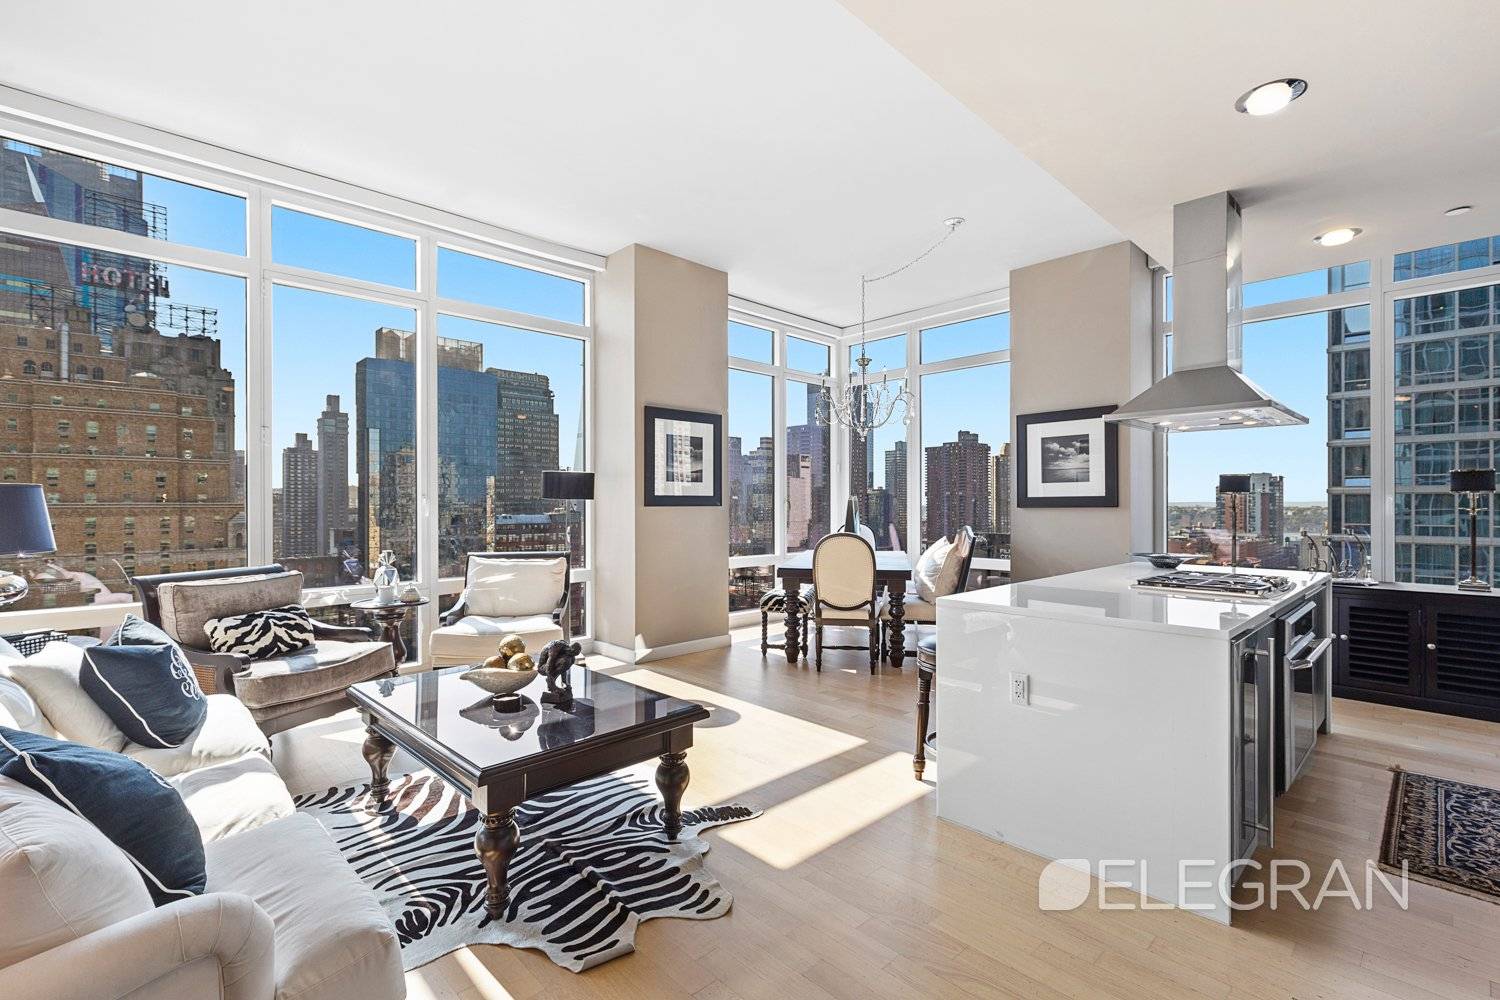 Step into this sun drenched two bedrooms in the heart of Times Square.